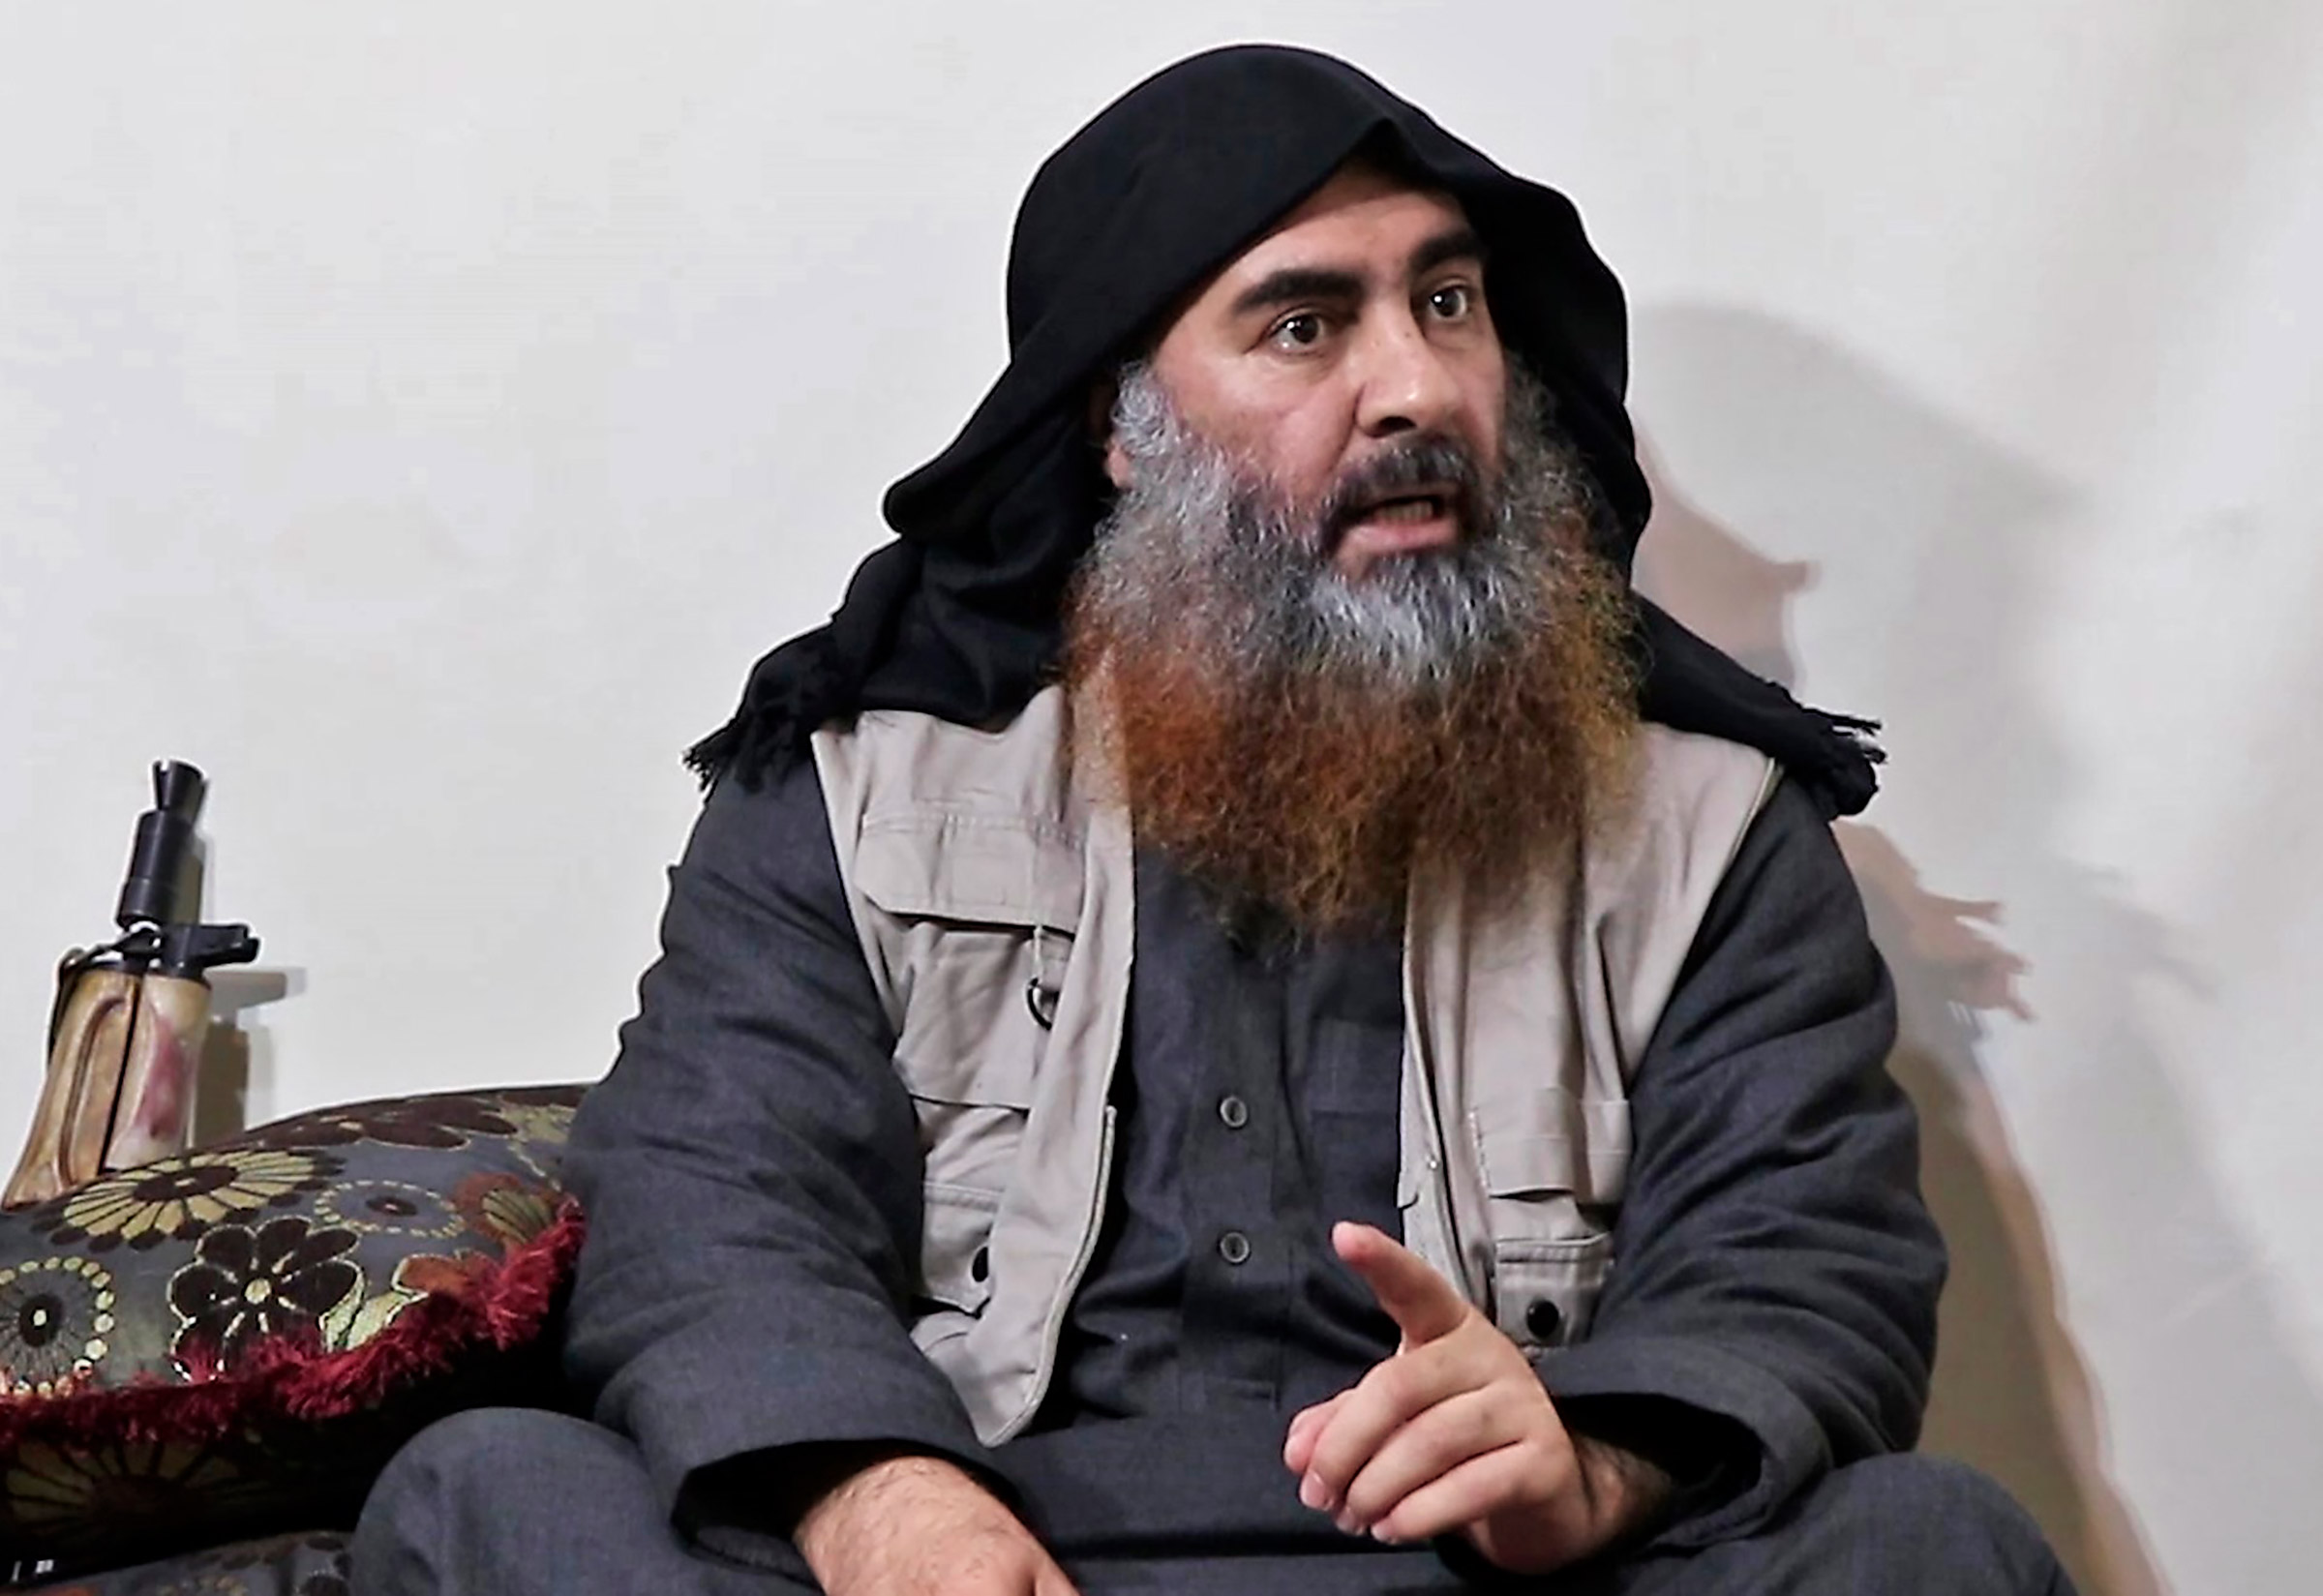 An ISIS video released in April gave the world its first glimpse of al-Baghdadi in five years